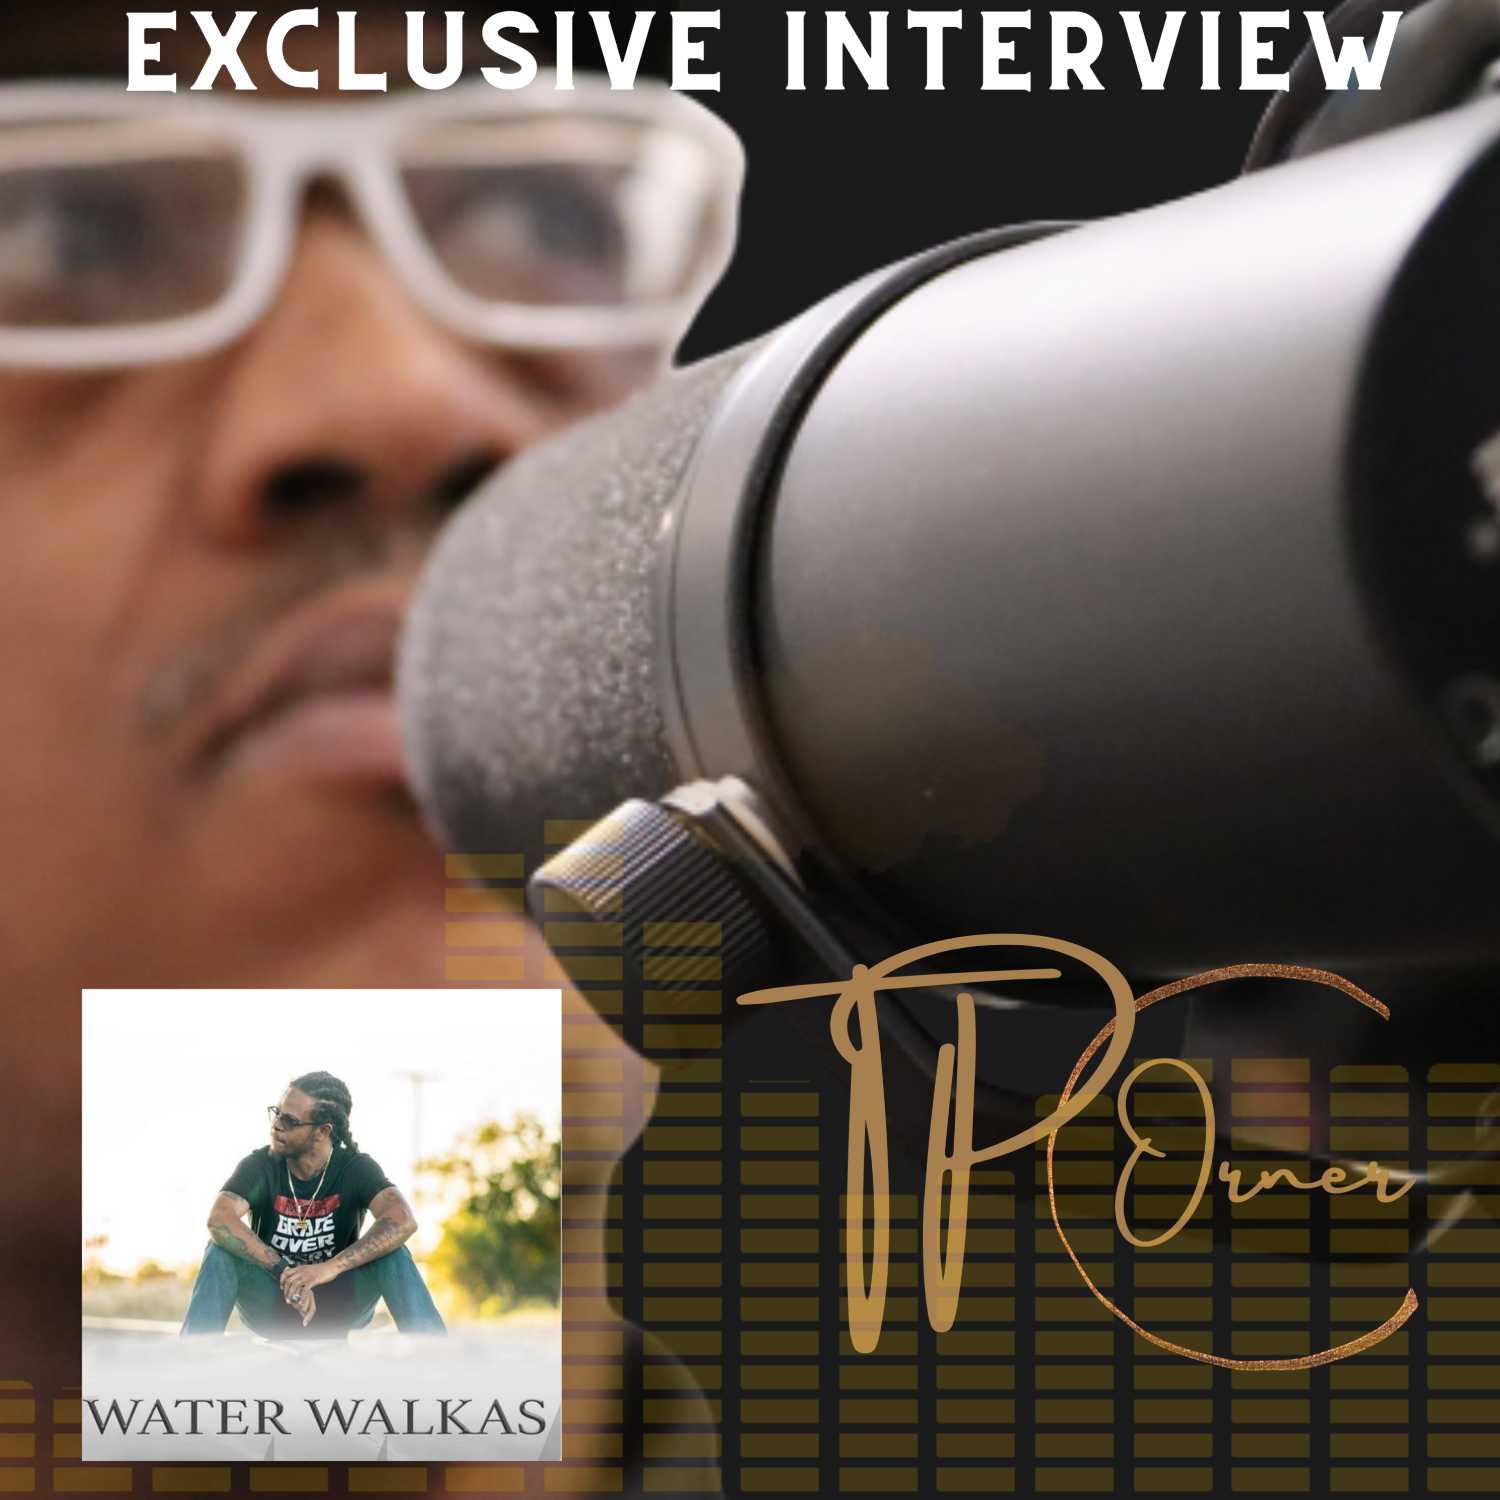 TPC-EXCLUSIVE INTERVIEW WITH PRODUCER/ARTIST/ENTREPRENEUR WATER WALKAS SE2 EP54